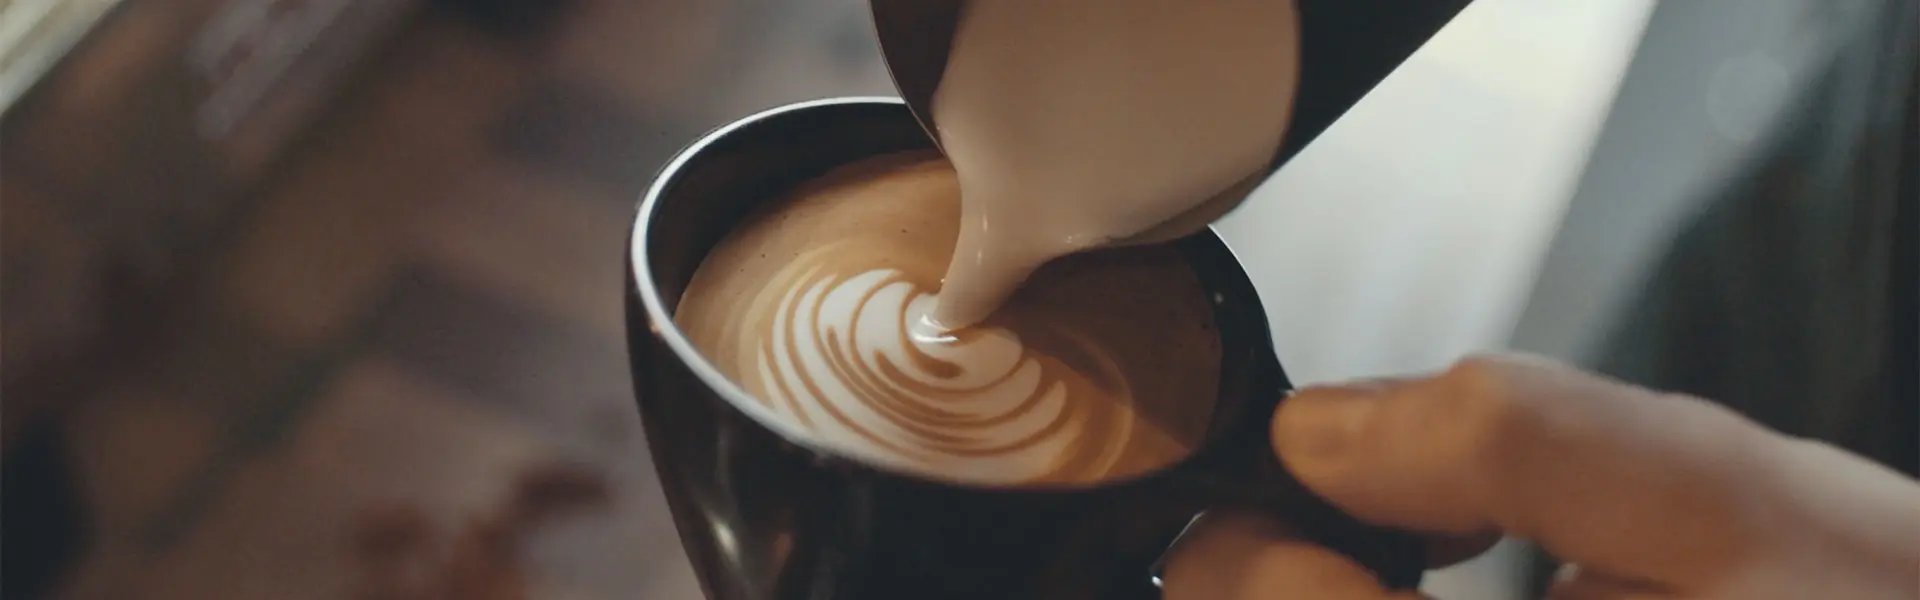 Pouring coffee